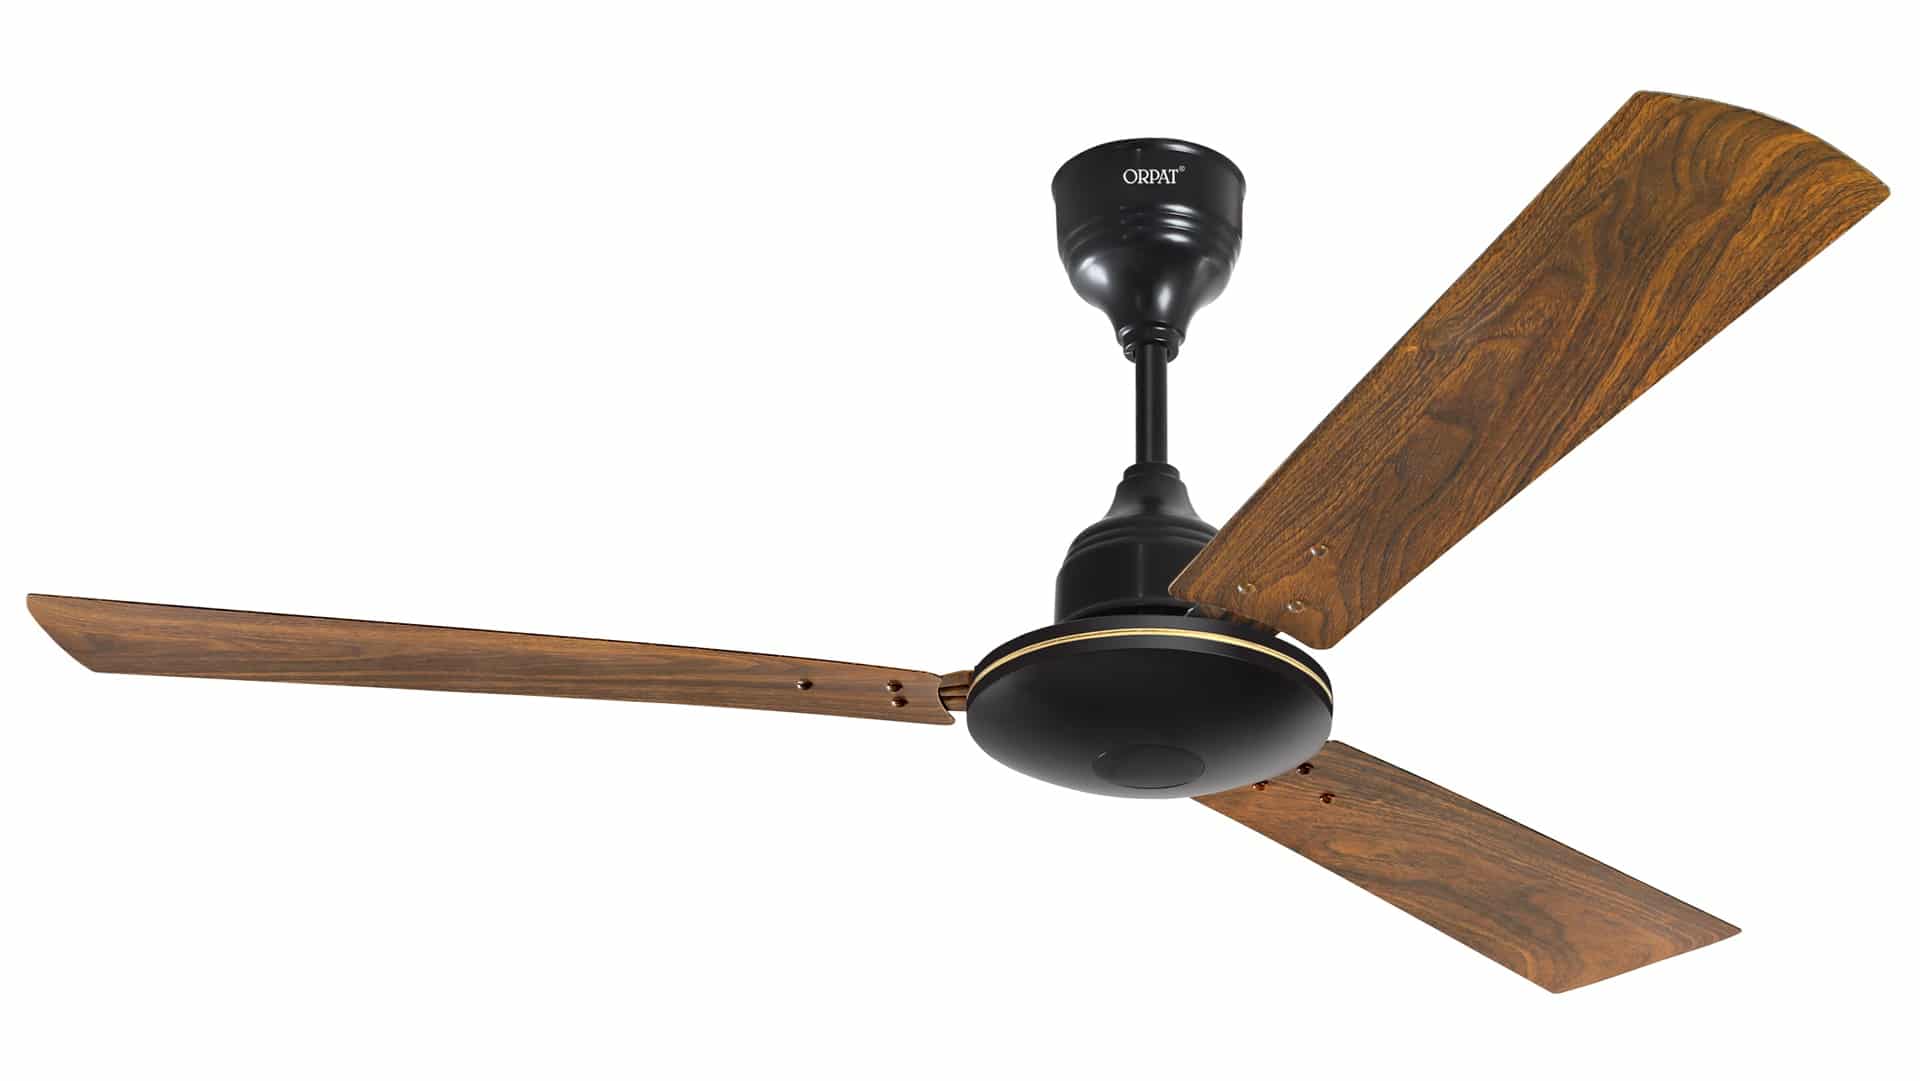 Orpat Group forays into IoT-enabled fans category